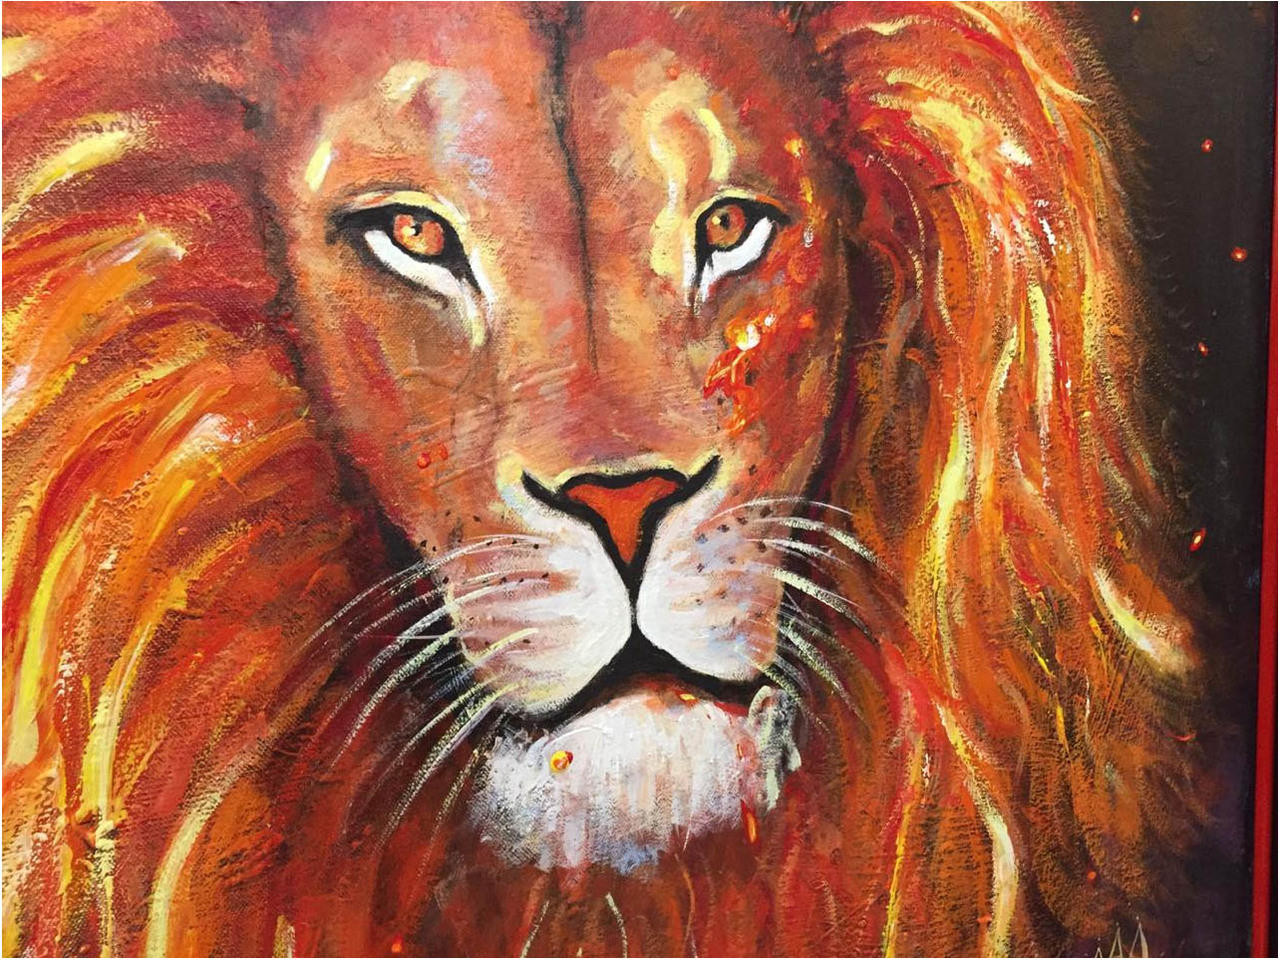 Original Painting on Canvas 85x85 cm , Lion Acrylic painting on Canvas